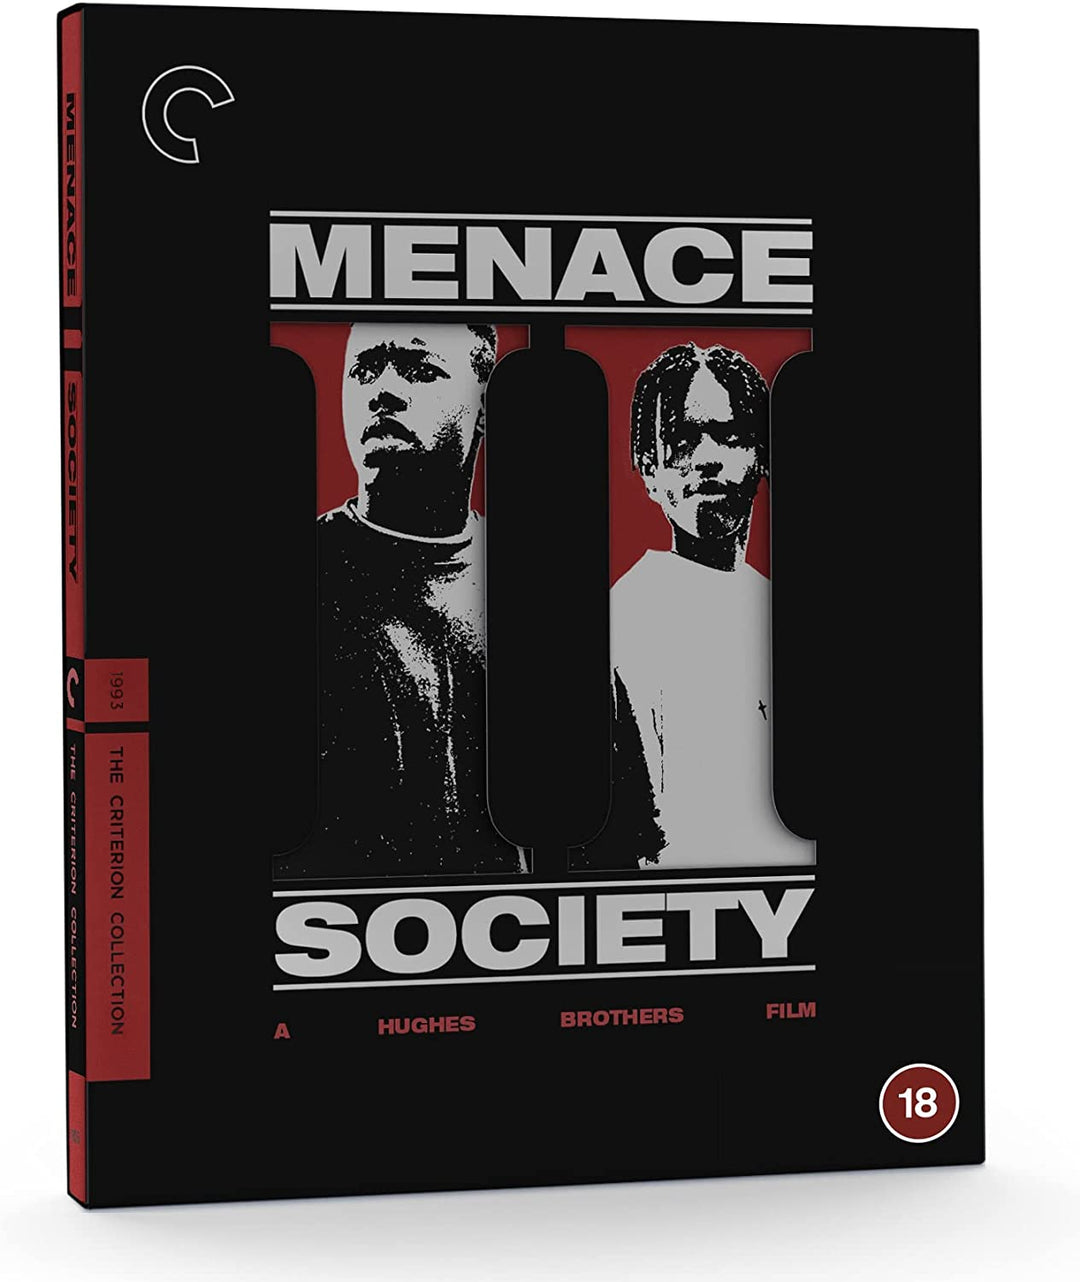 Menace II Society (1993) (Criterion Collection) UK Only [Blu-ray] [2021] - [Blu-ray]